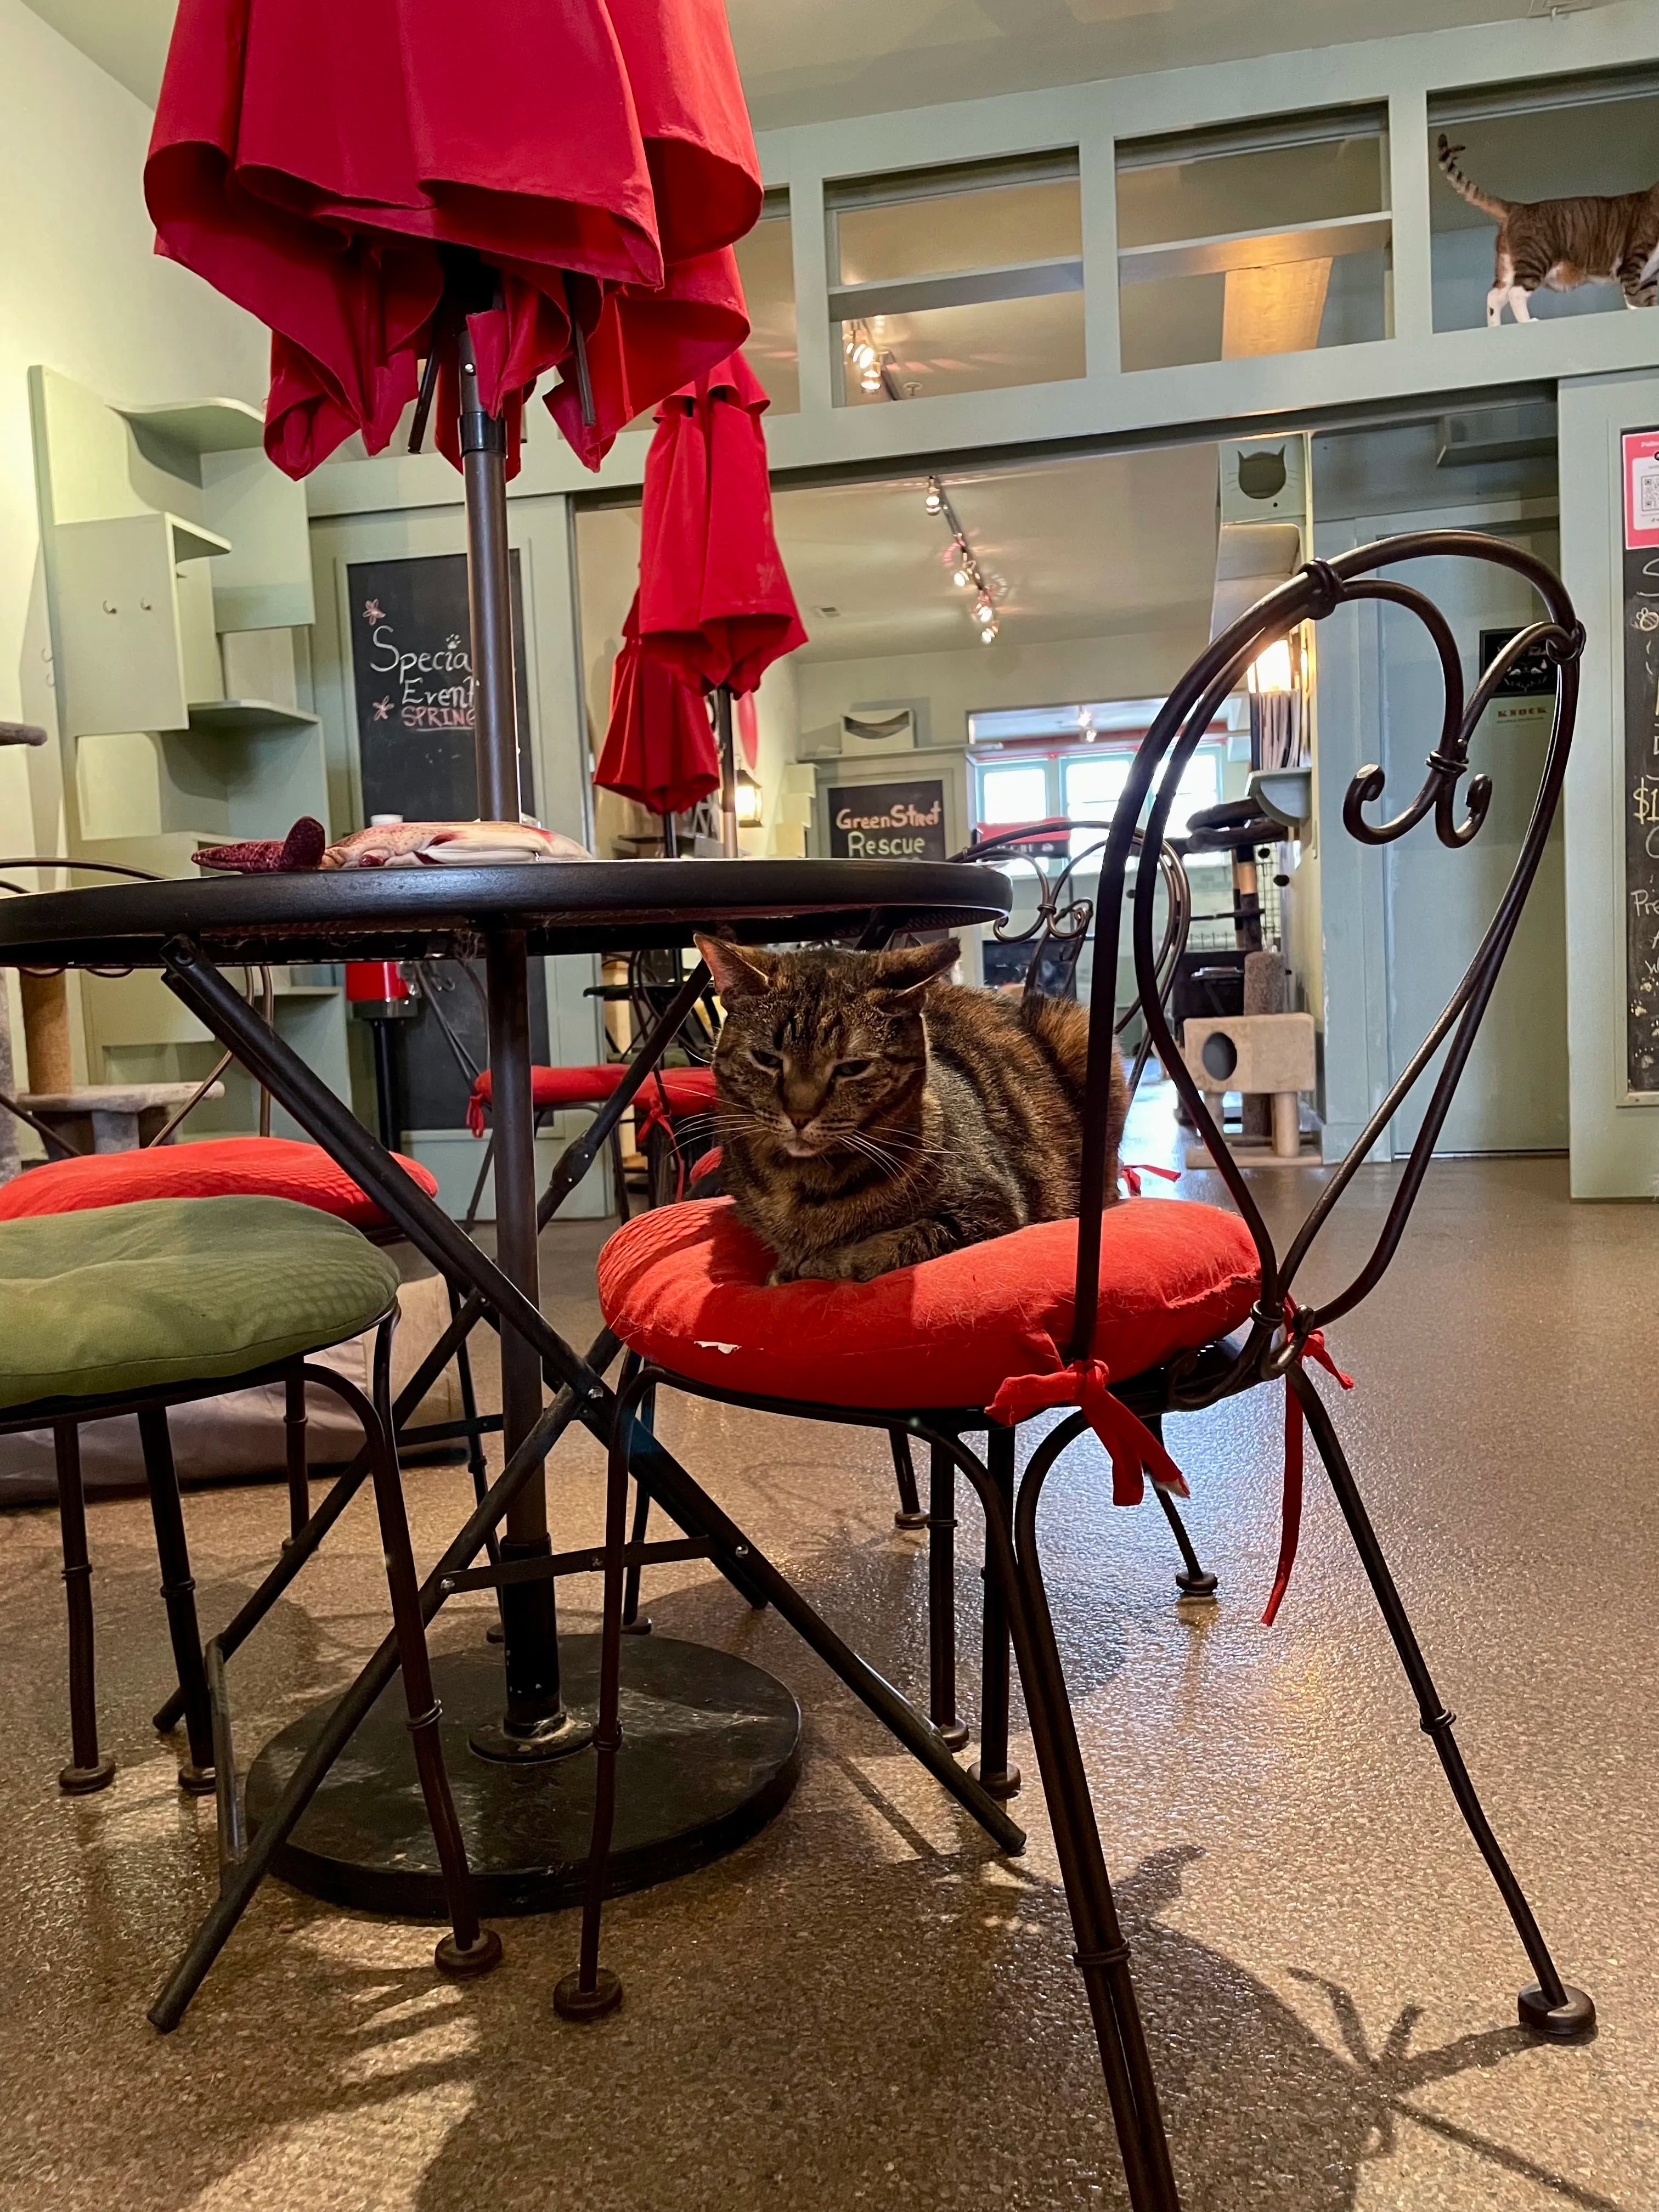 Visit this cat cafe on West Girard Avenue.